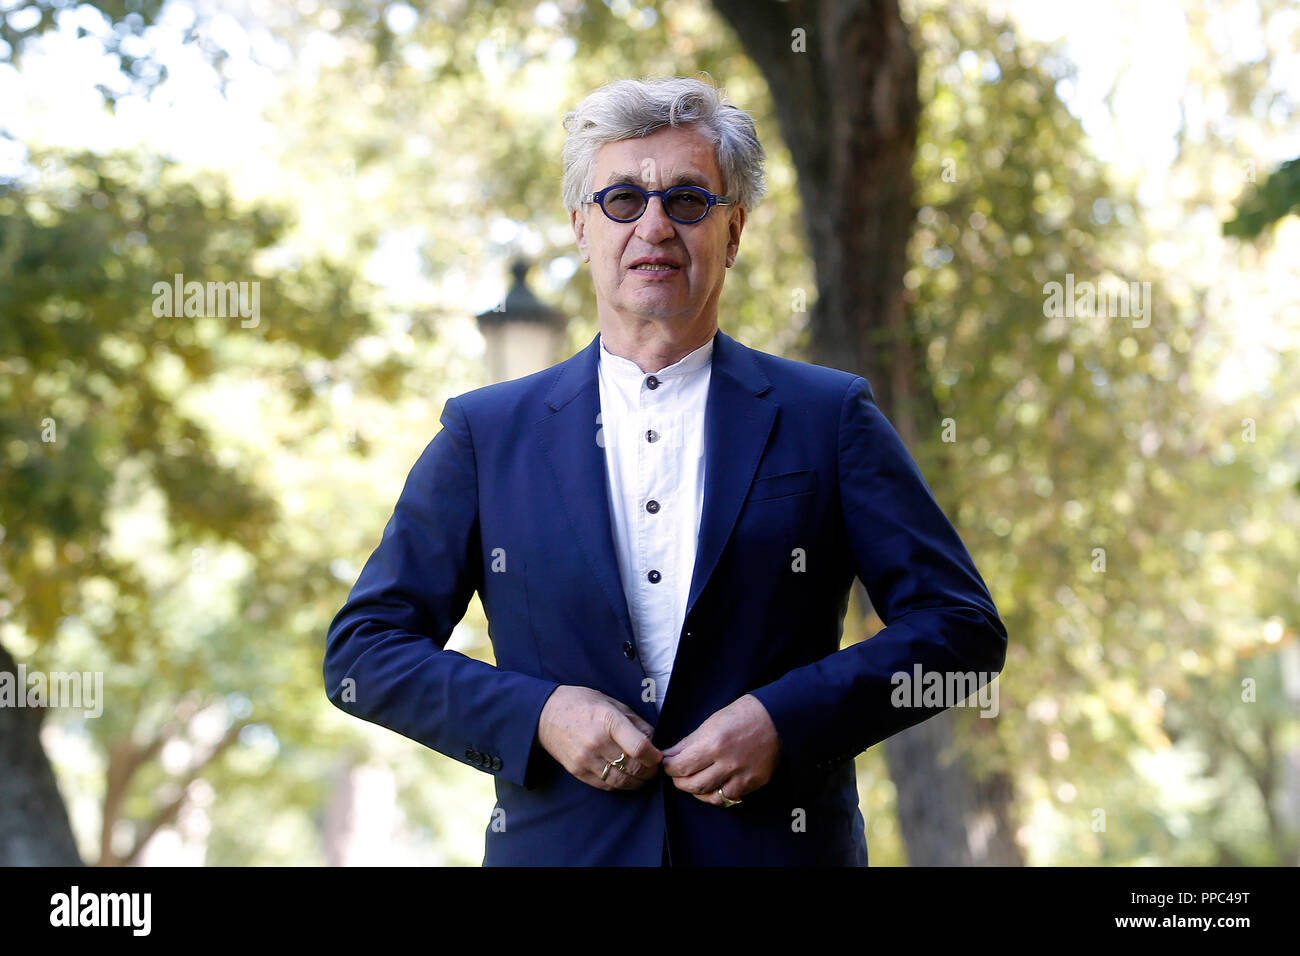 Rome, Italy. 25th Sep 2018. Wim Wenders Roma 25/09/2018. 'Papa Francesco - Un uomo di parola' Photocall Rome September 25th 2018. Film director, Wim Wenders during the photocall for the film 'Pope Francis: A man of his word'  Foto Samantha Zucchi Insidefoto Credit: insidefoto srl/Alamy Live News Stock Photo